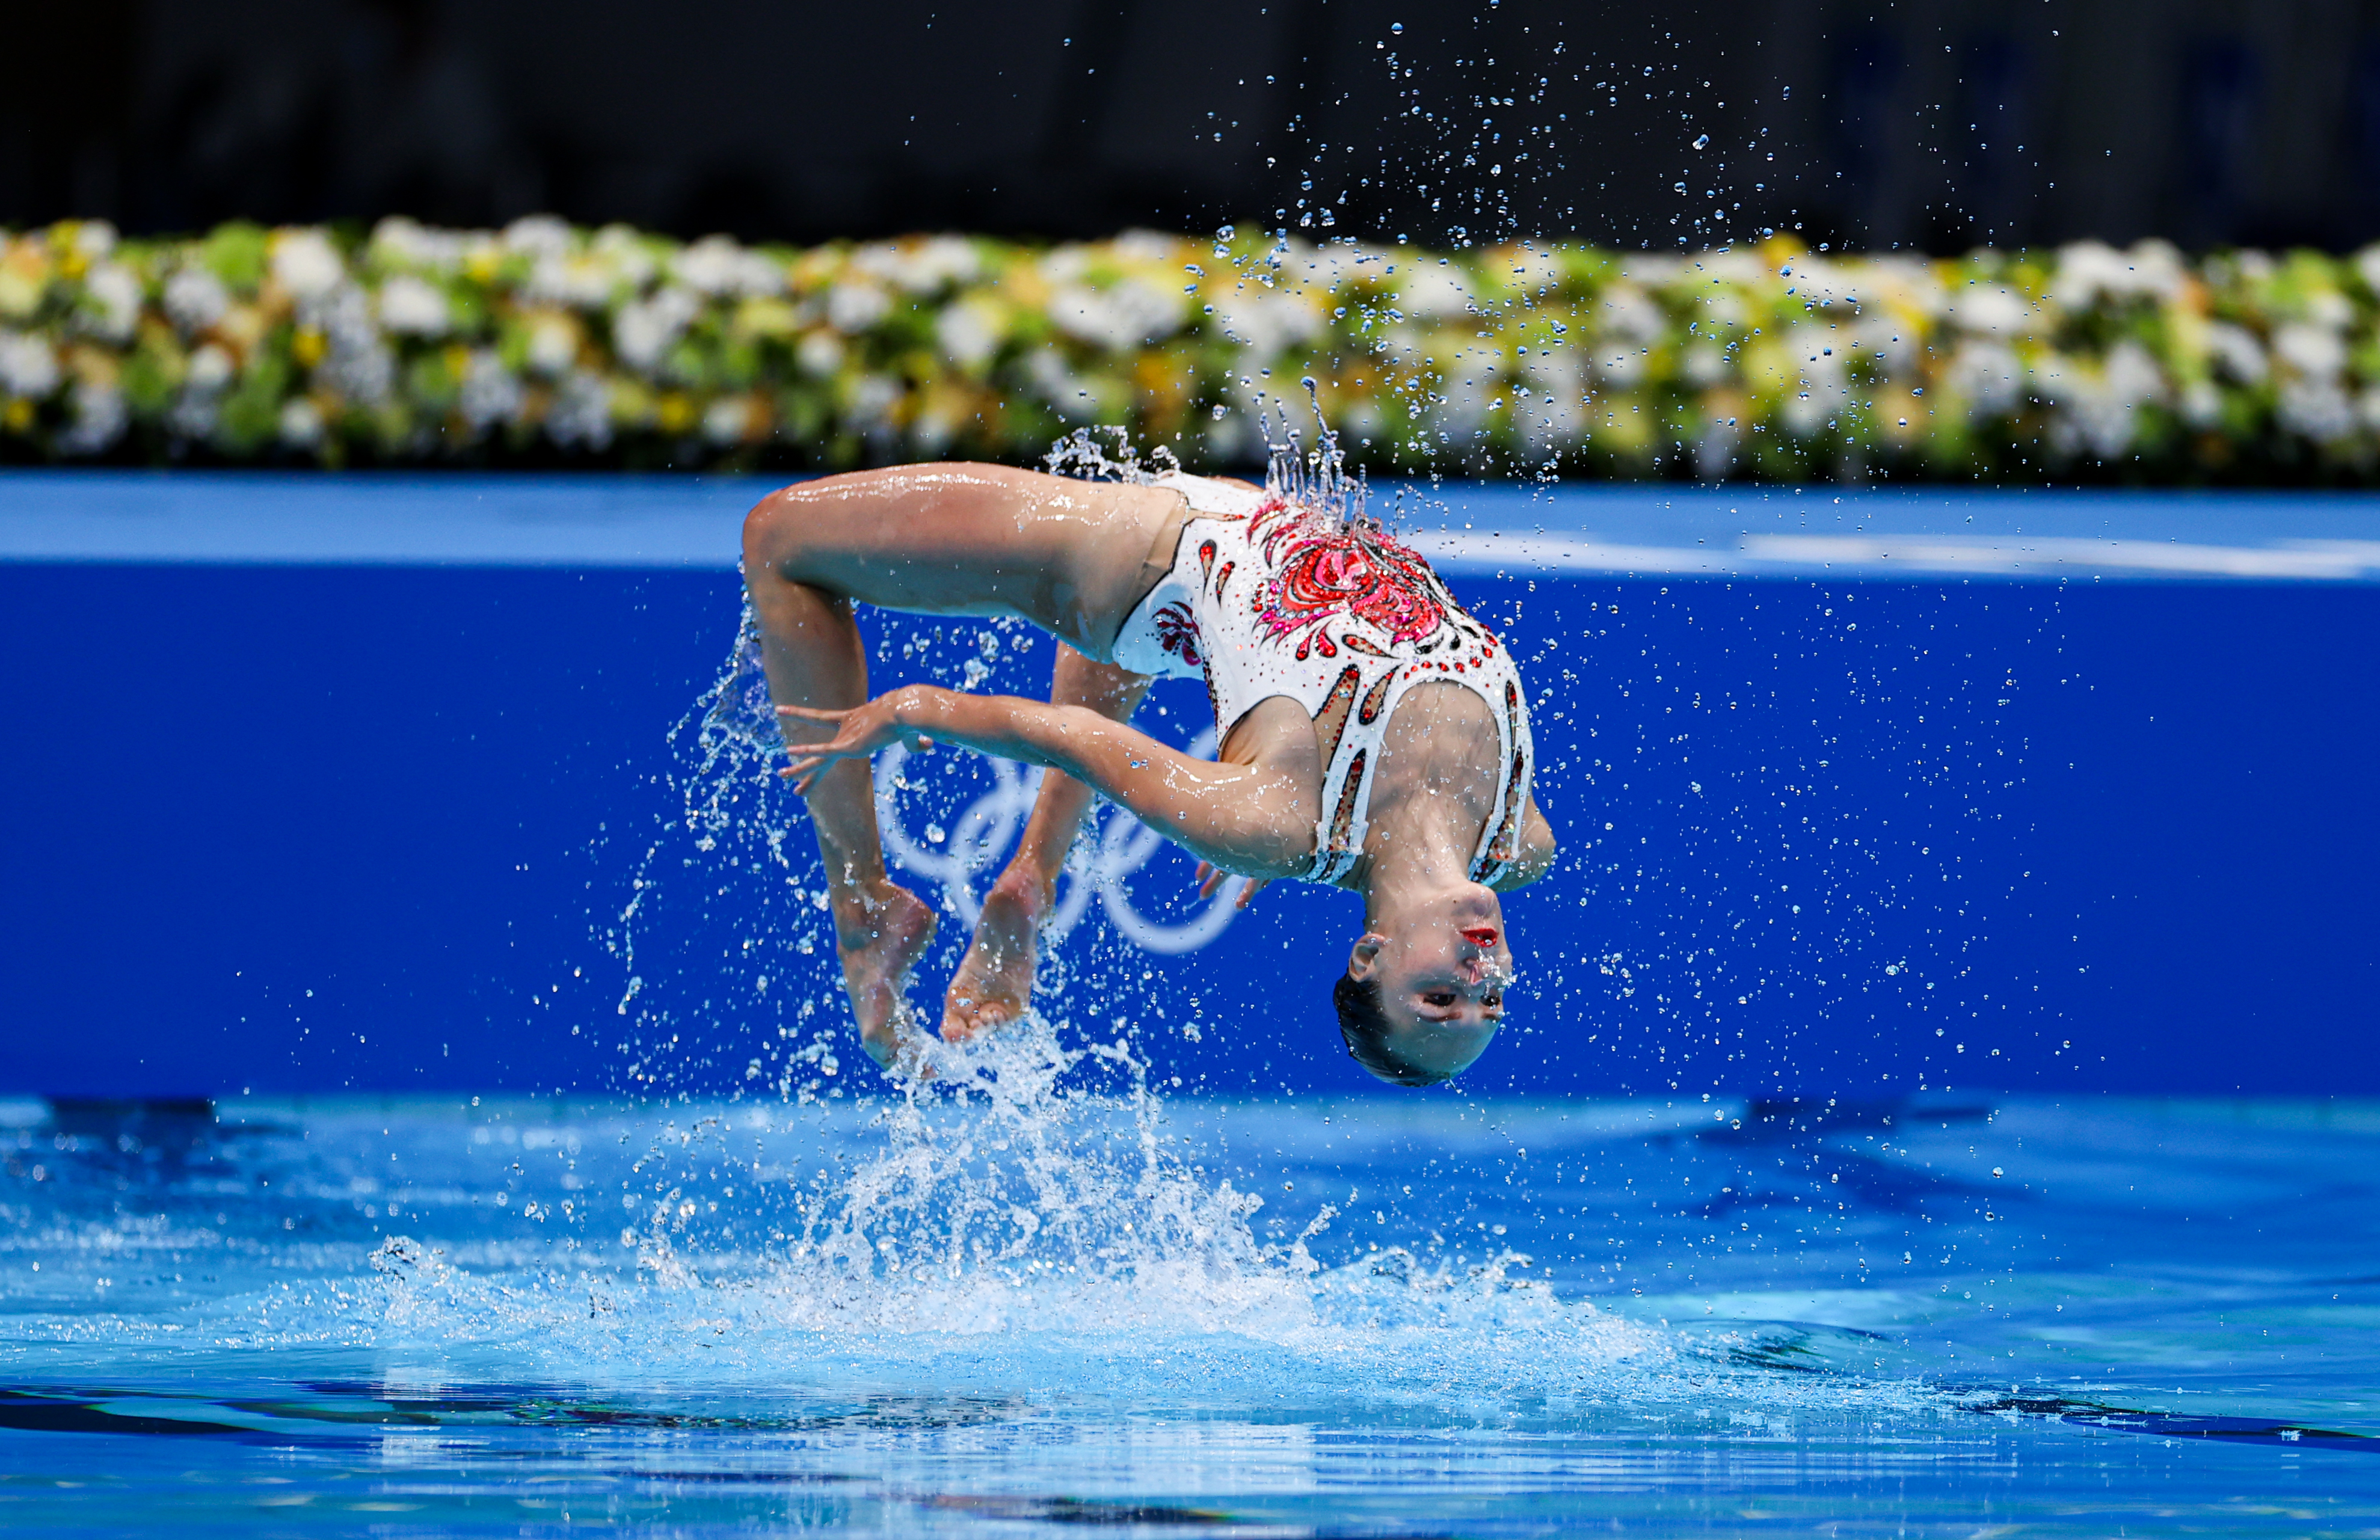 WATCH The Most Breathtaking Artistic Swimming Routines You Have to See to Believe